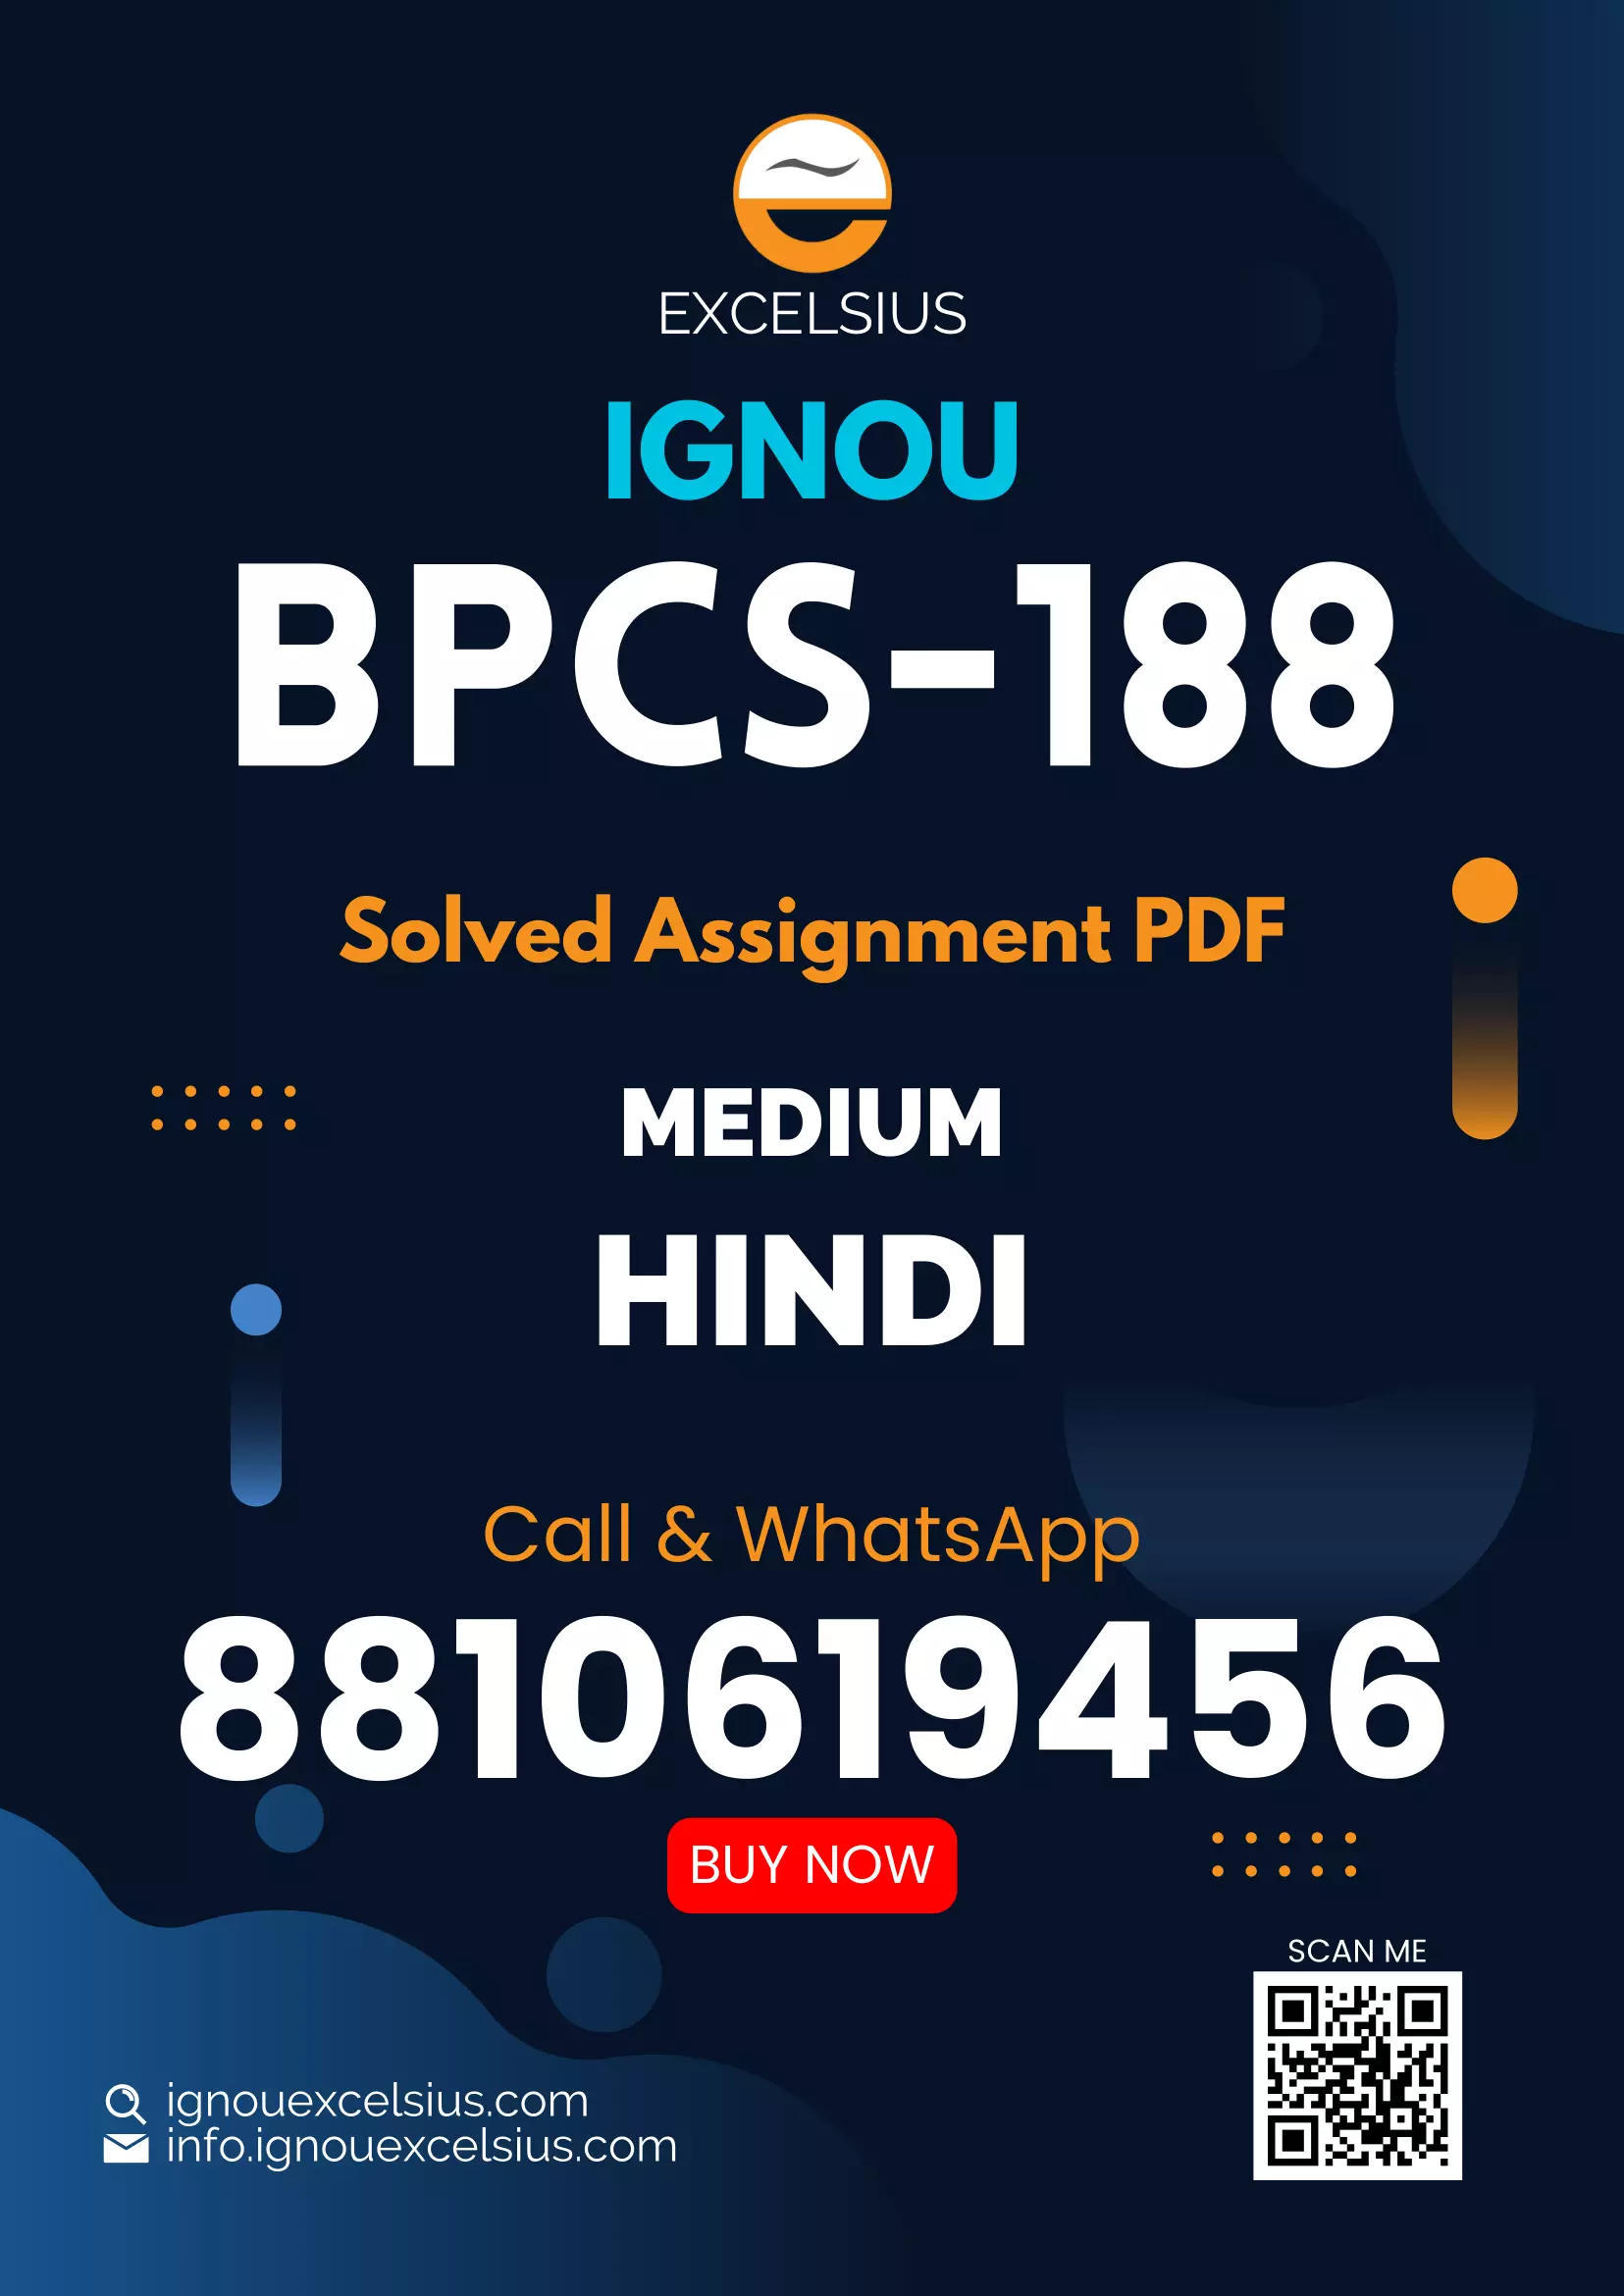 IGNOU BPCS-188 - Application of Social Psychology, Latest Solved Assignment-July 2022 – January 2023